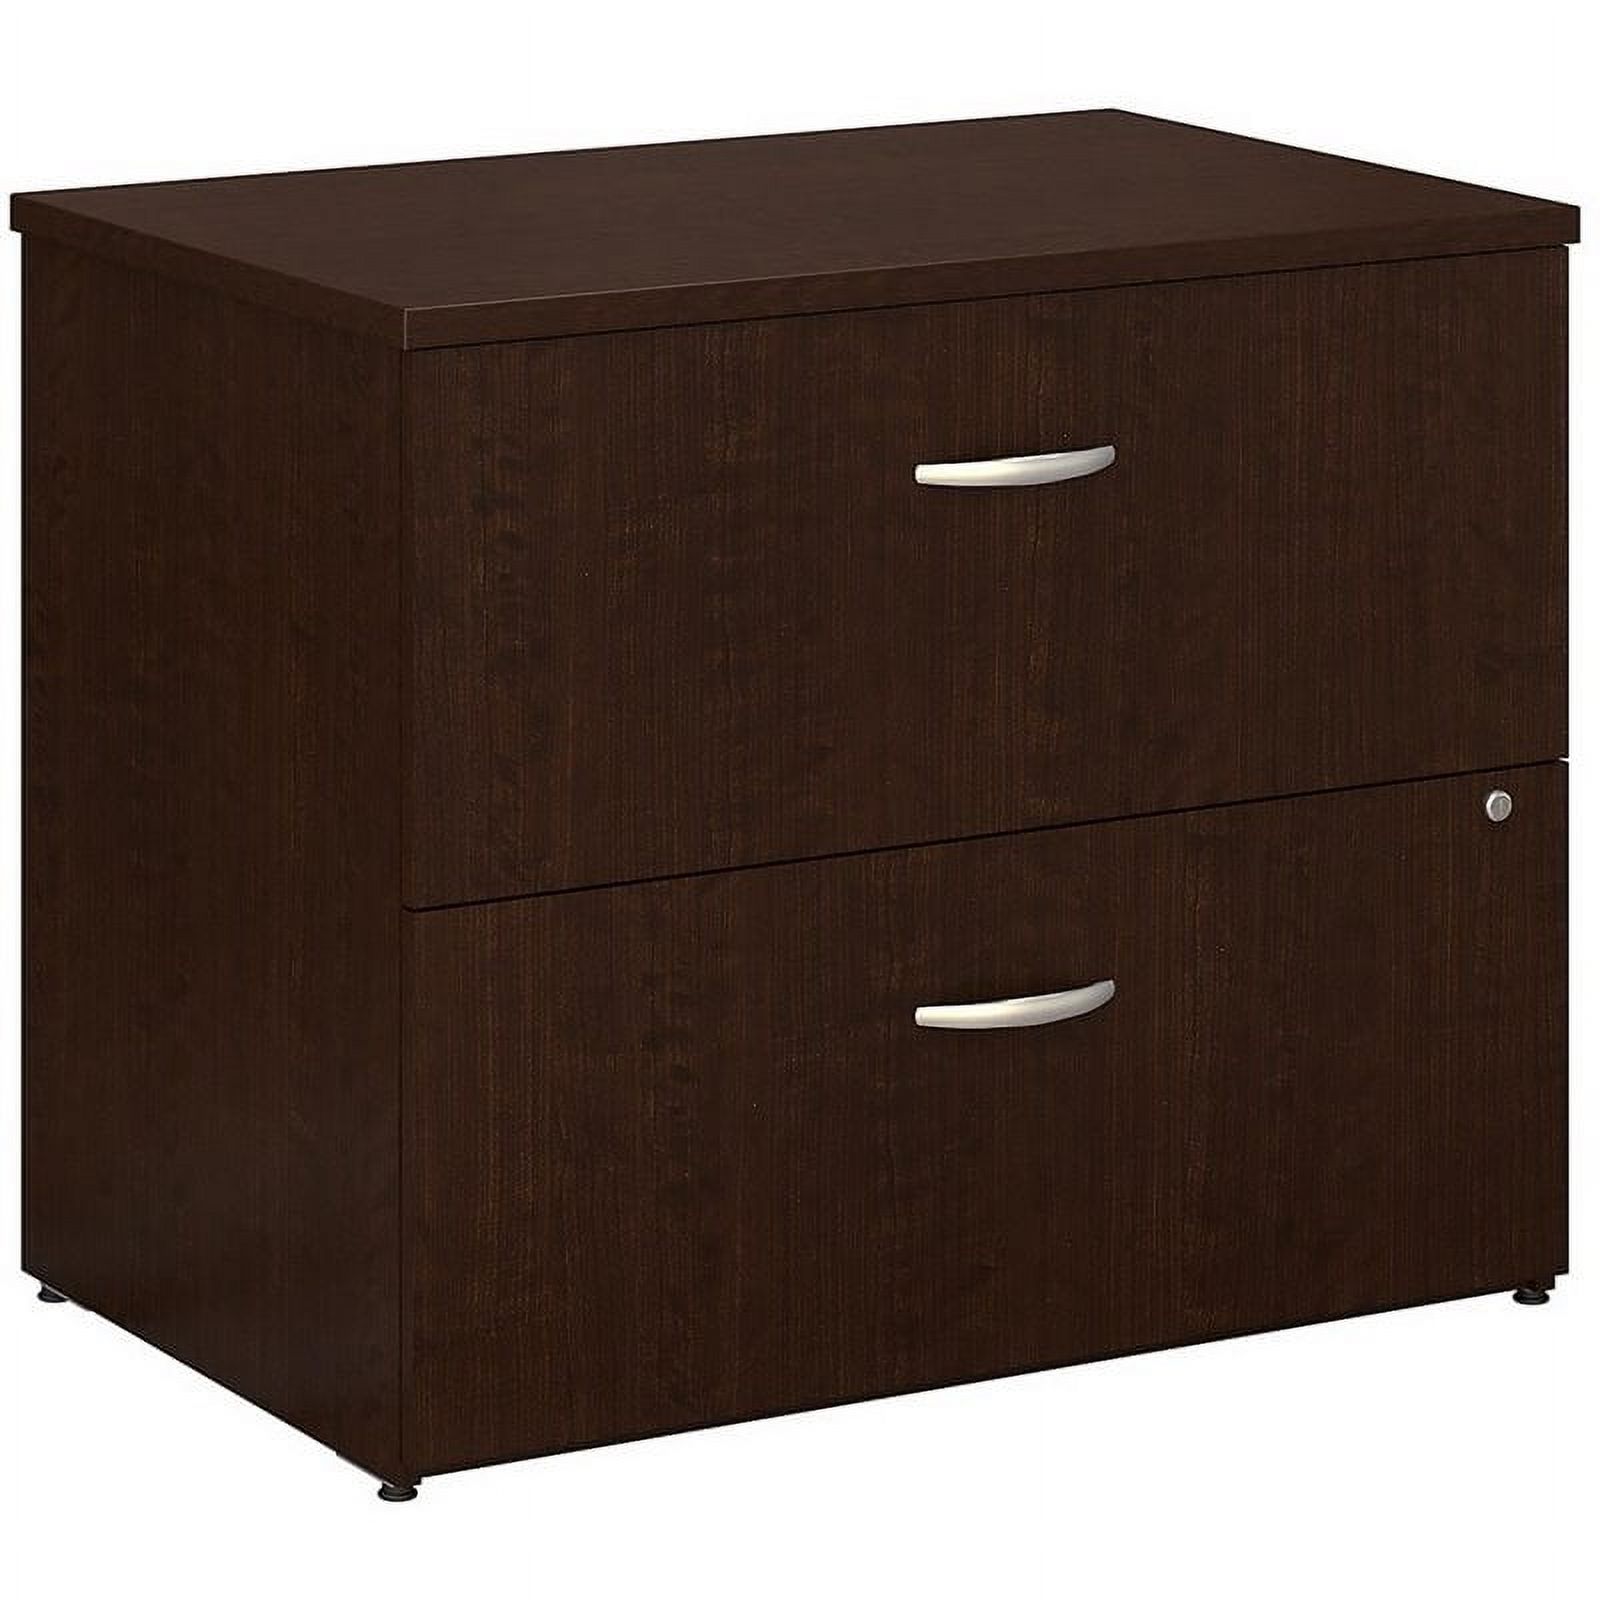 Home Square 2 Piece Wood Filing Cabinet Set with 2 Drawer in Mocha Cherry - image 2 of 9